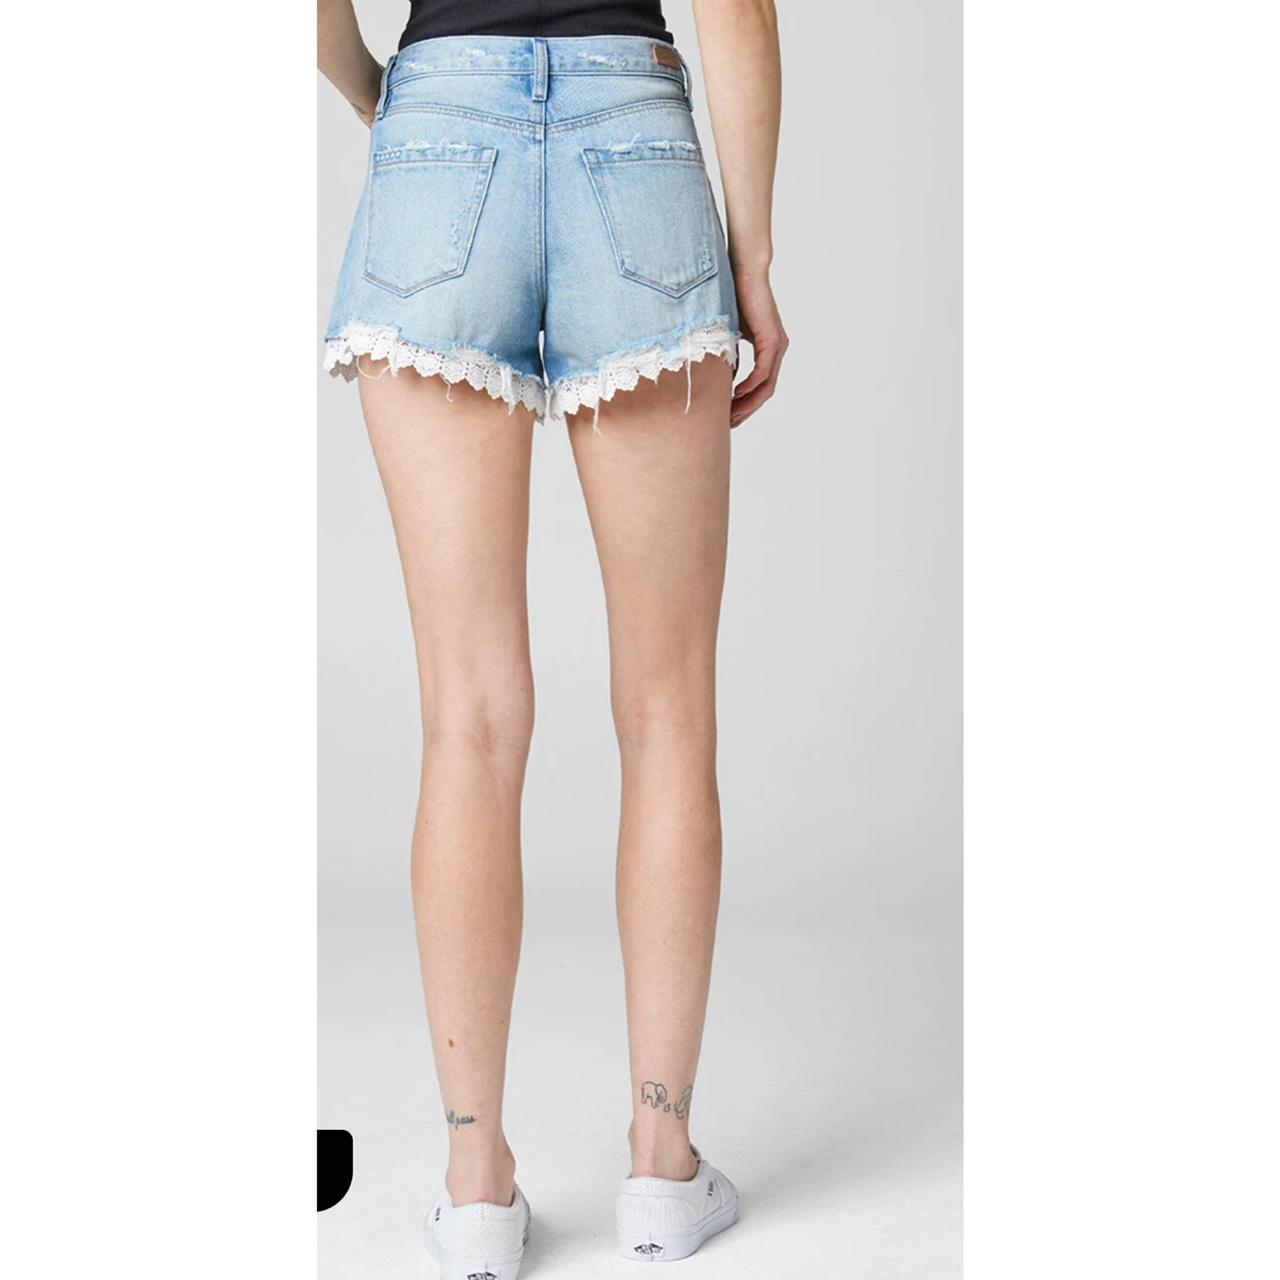 Blank NYC Women's Blue and White Shorts (4)